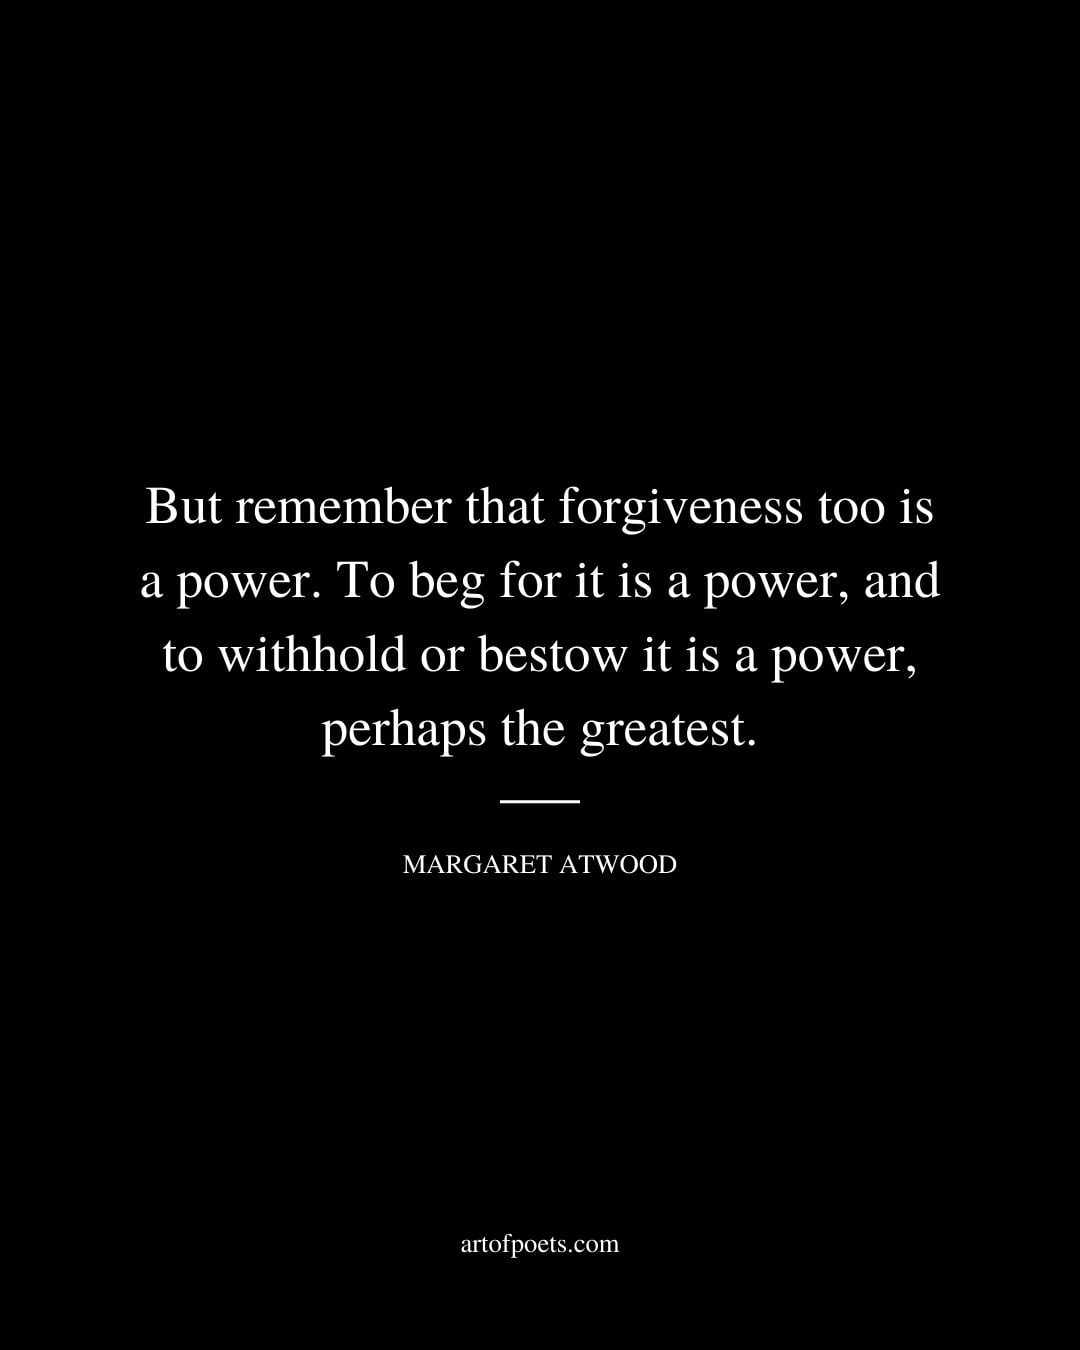 But remember that forgiveness too is a power. To beg for it is a power and to withhold or bestow it is a power perhaps the greatest. Margaret Atwood